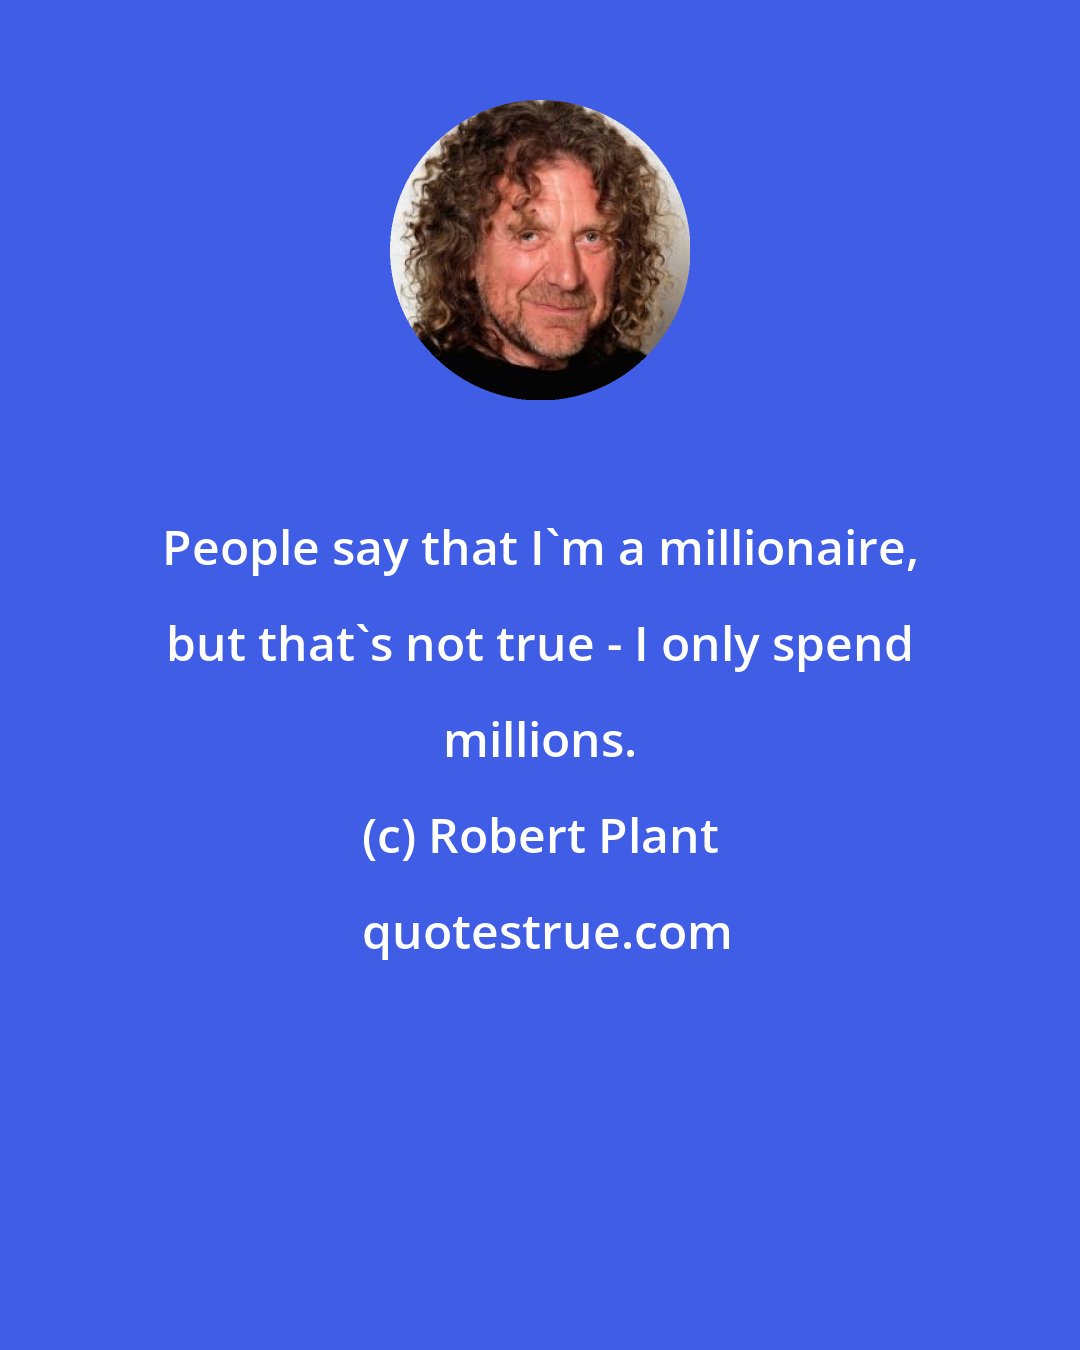 Robert Plant: People say that I'm a millionaire, but that's not true - I only spend millions.